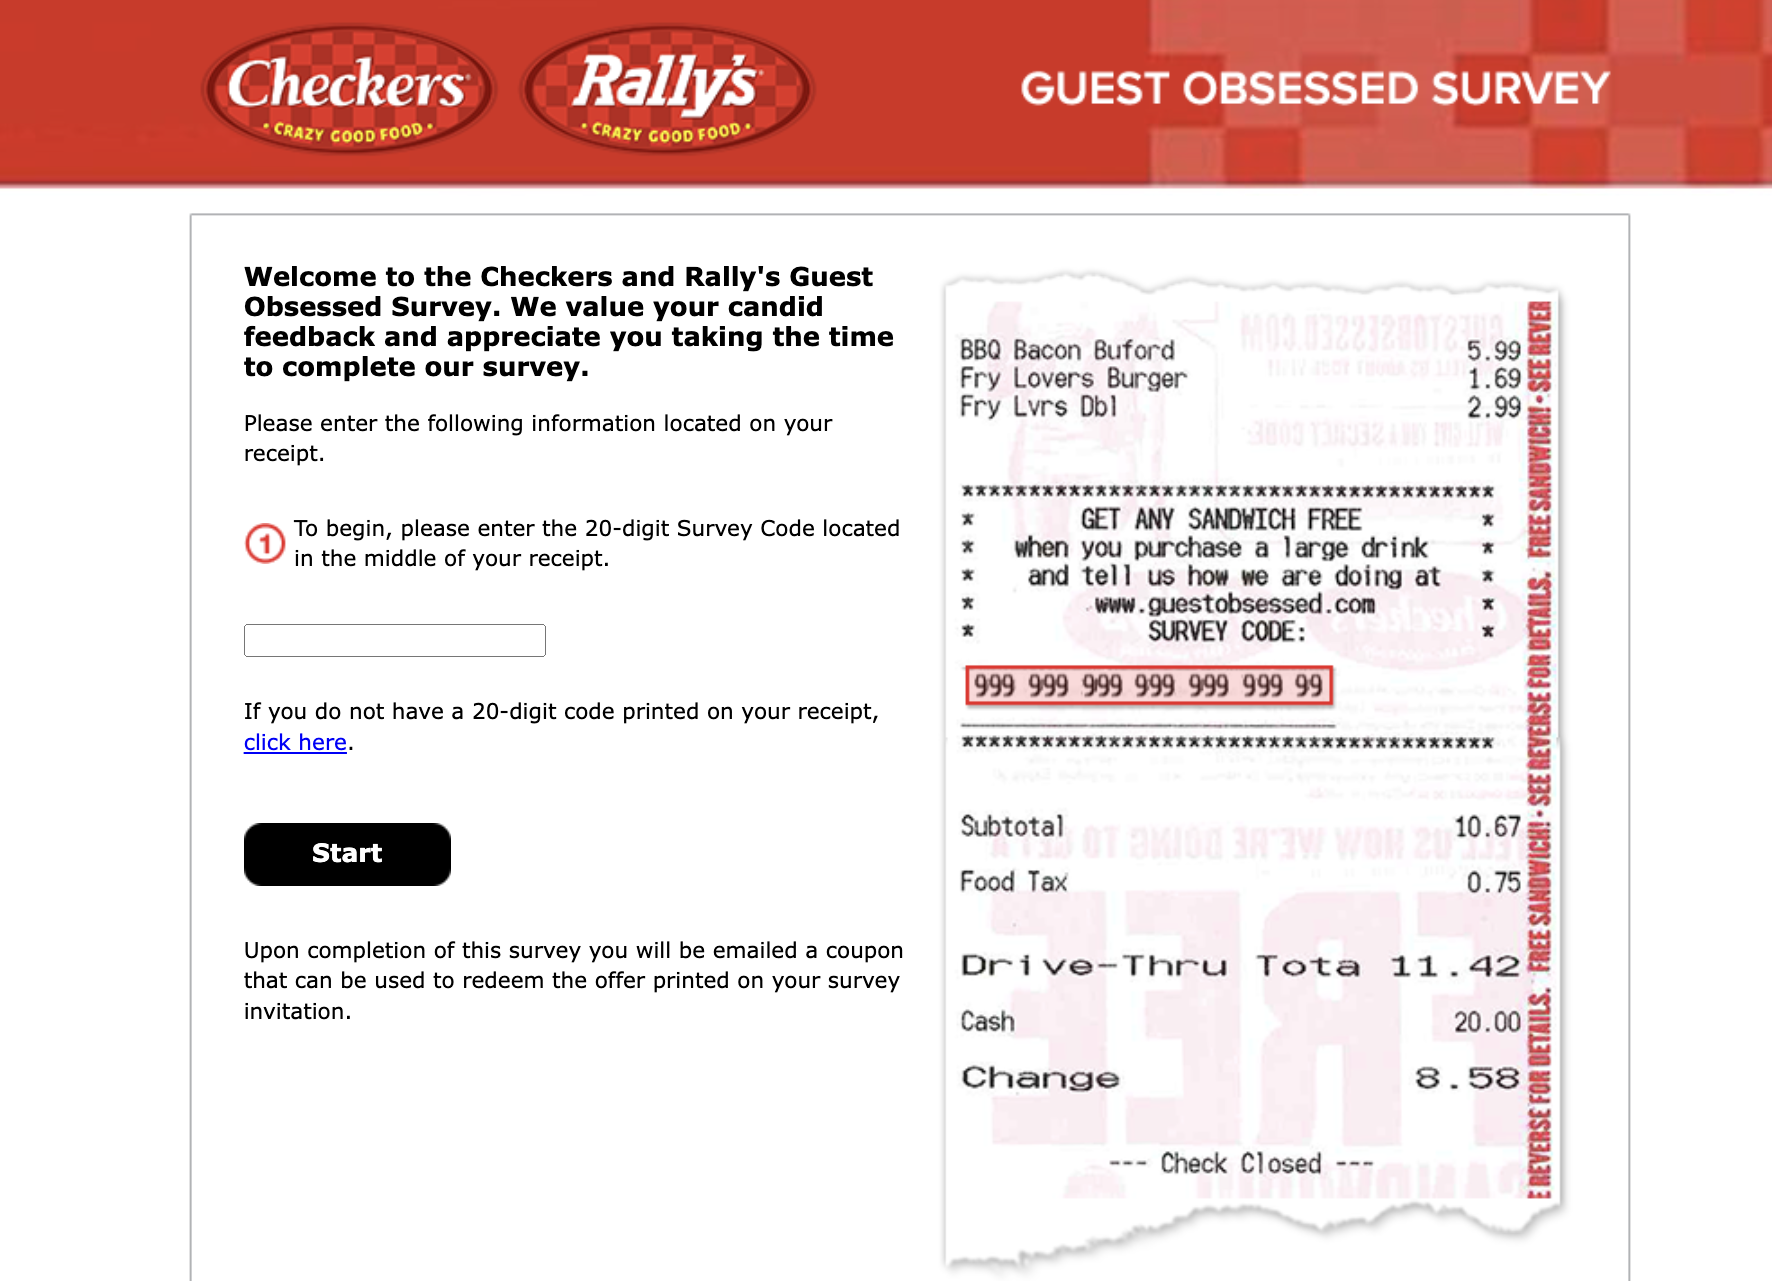 Welcome to Guestobsessed Survey - FREE Coupon Checkers & Rally's